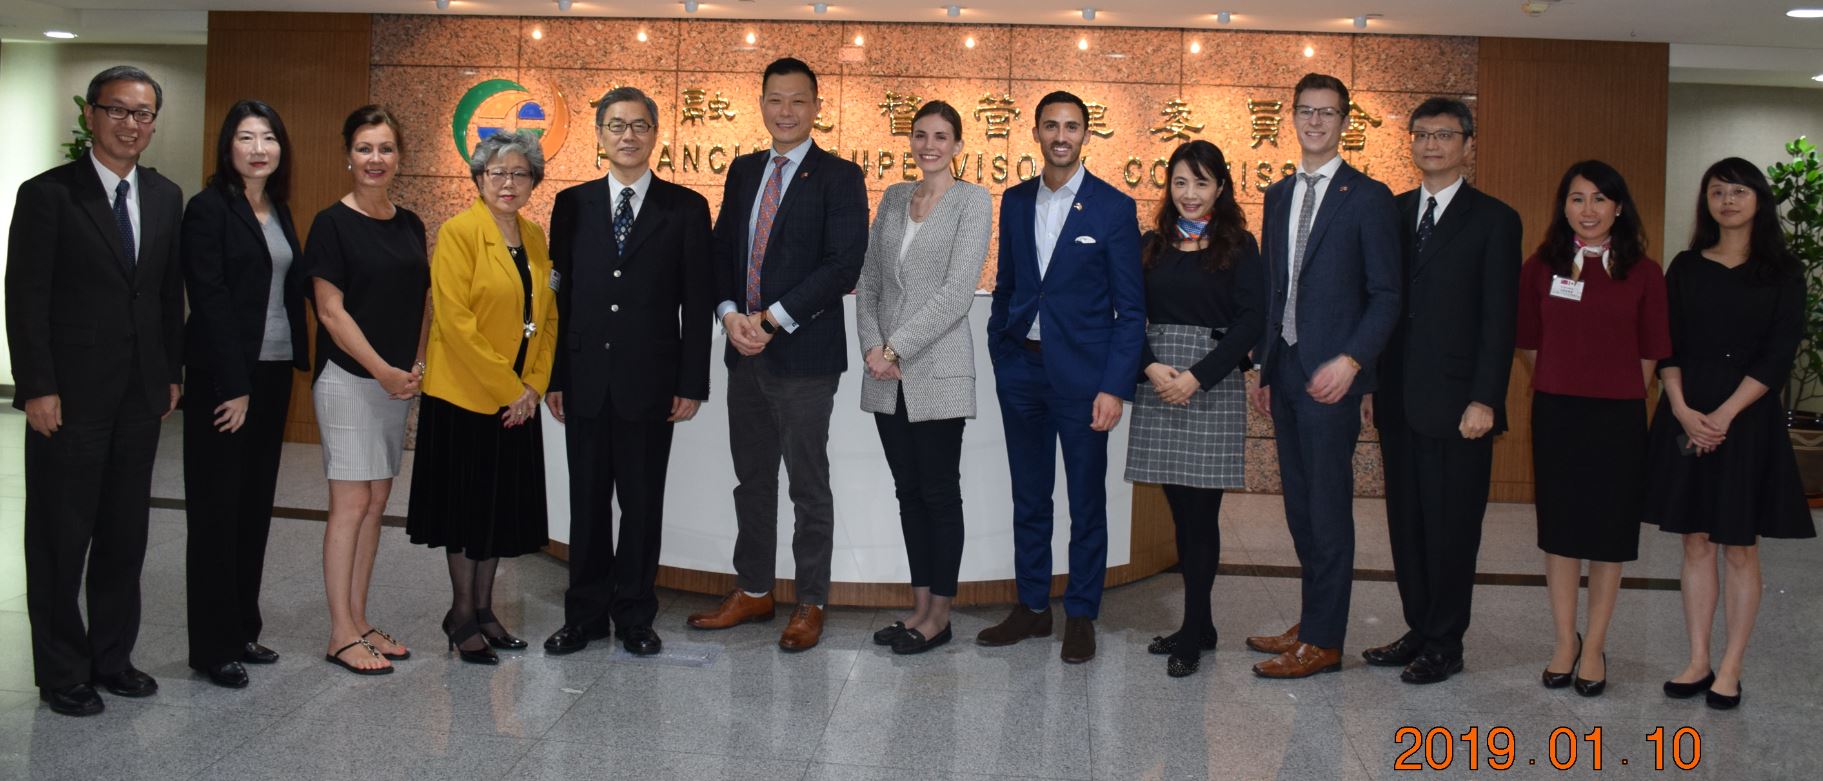 The delegation of Legislative Assembly of Ontario, Canada, was warmly received by FSC Vice Chairman Thomas Huang on January 10, 2019. The two sides broadly exchanged views on FinTech and cyber security issues.